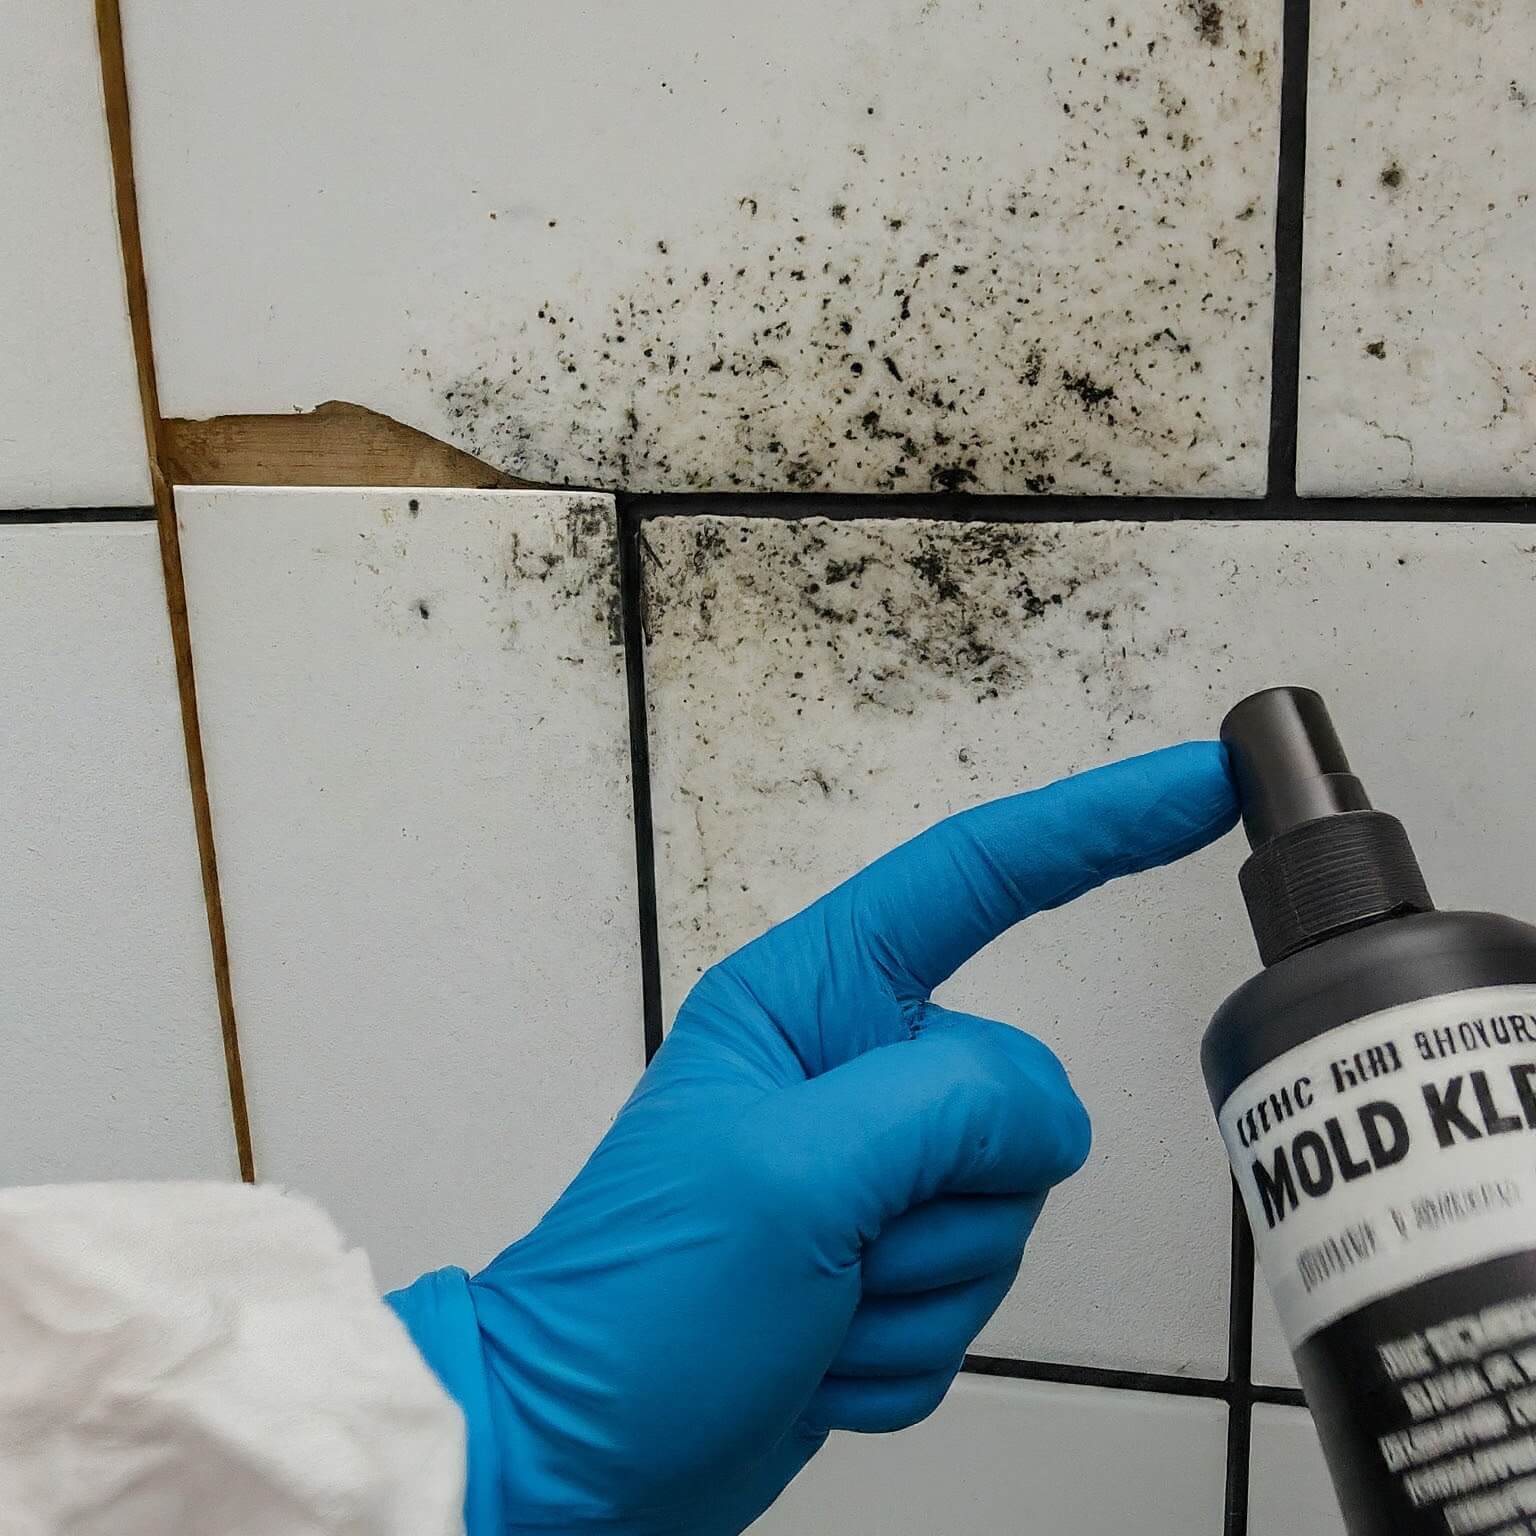 A person is holding a bottle of mold killer on a tiled floor.